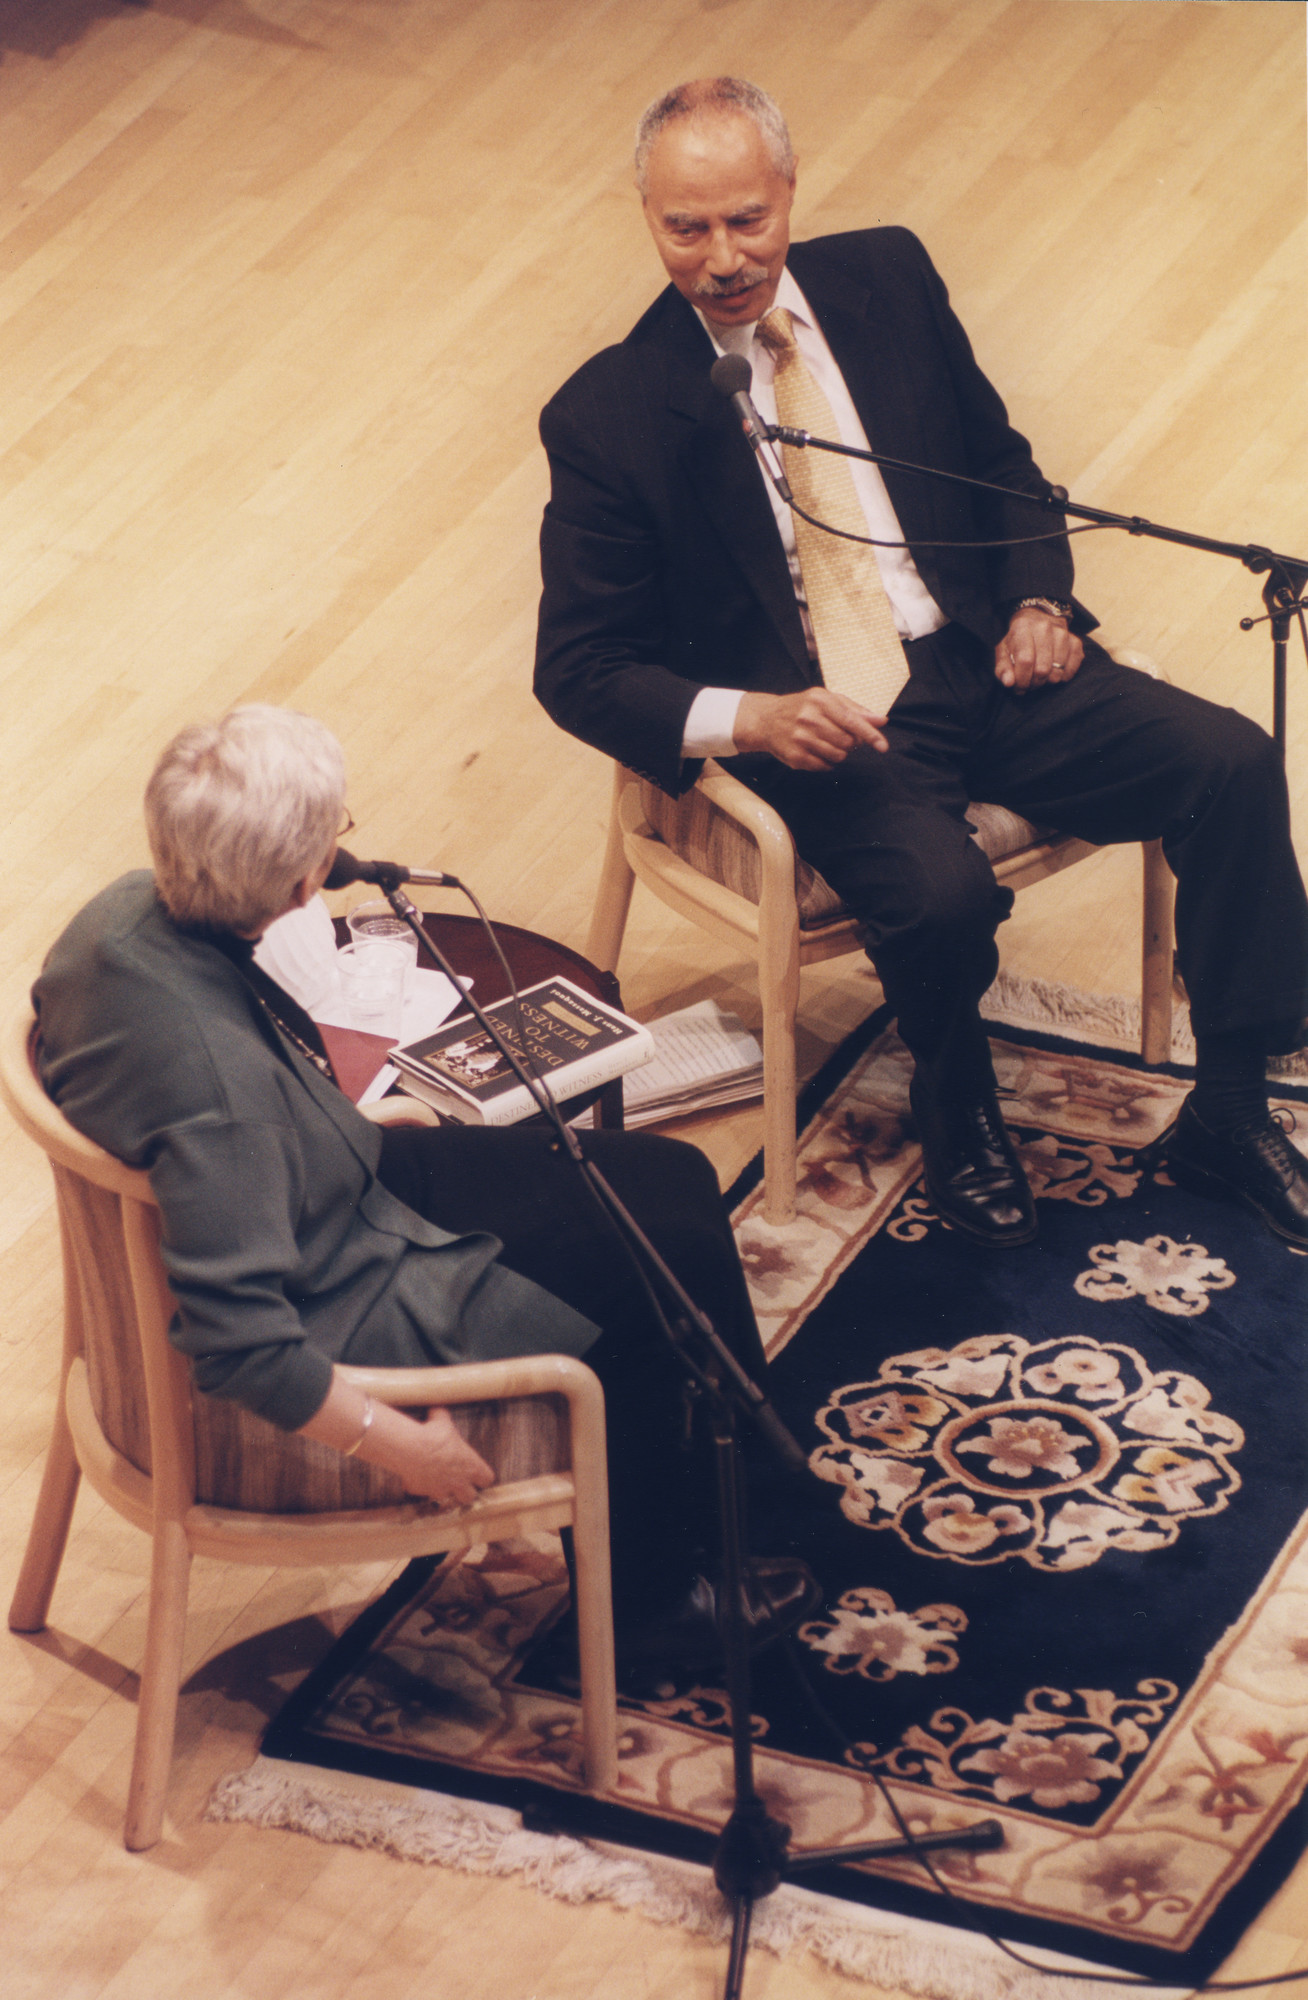 Hans J. Massaquoi, author of "Destined to Witness: Growing up Black in Nazi Germany," responds to questions at the U.S. Holocaust Memorial Museum public program entitled, "An evening with Hans J. Massaquoi."

The interview was conducted by Oral History Director Joan Ringelheim.